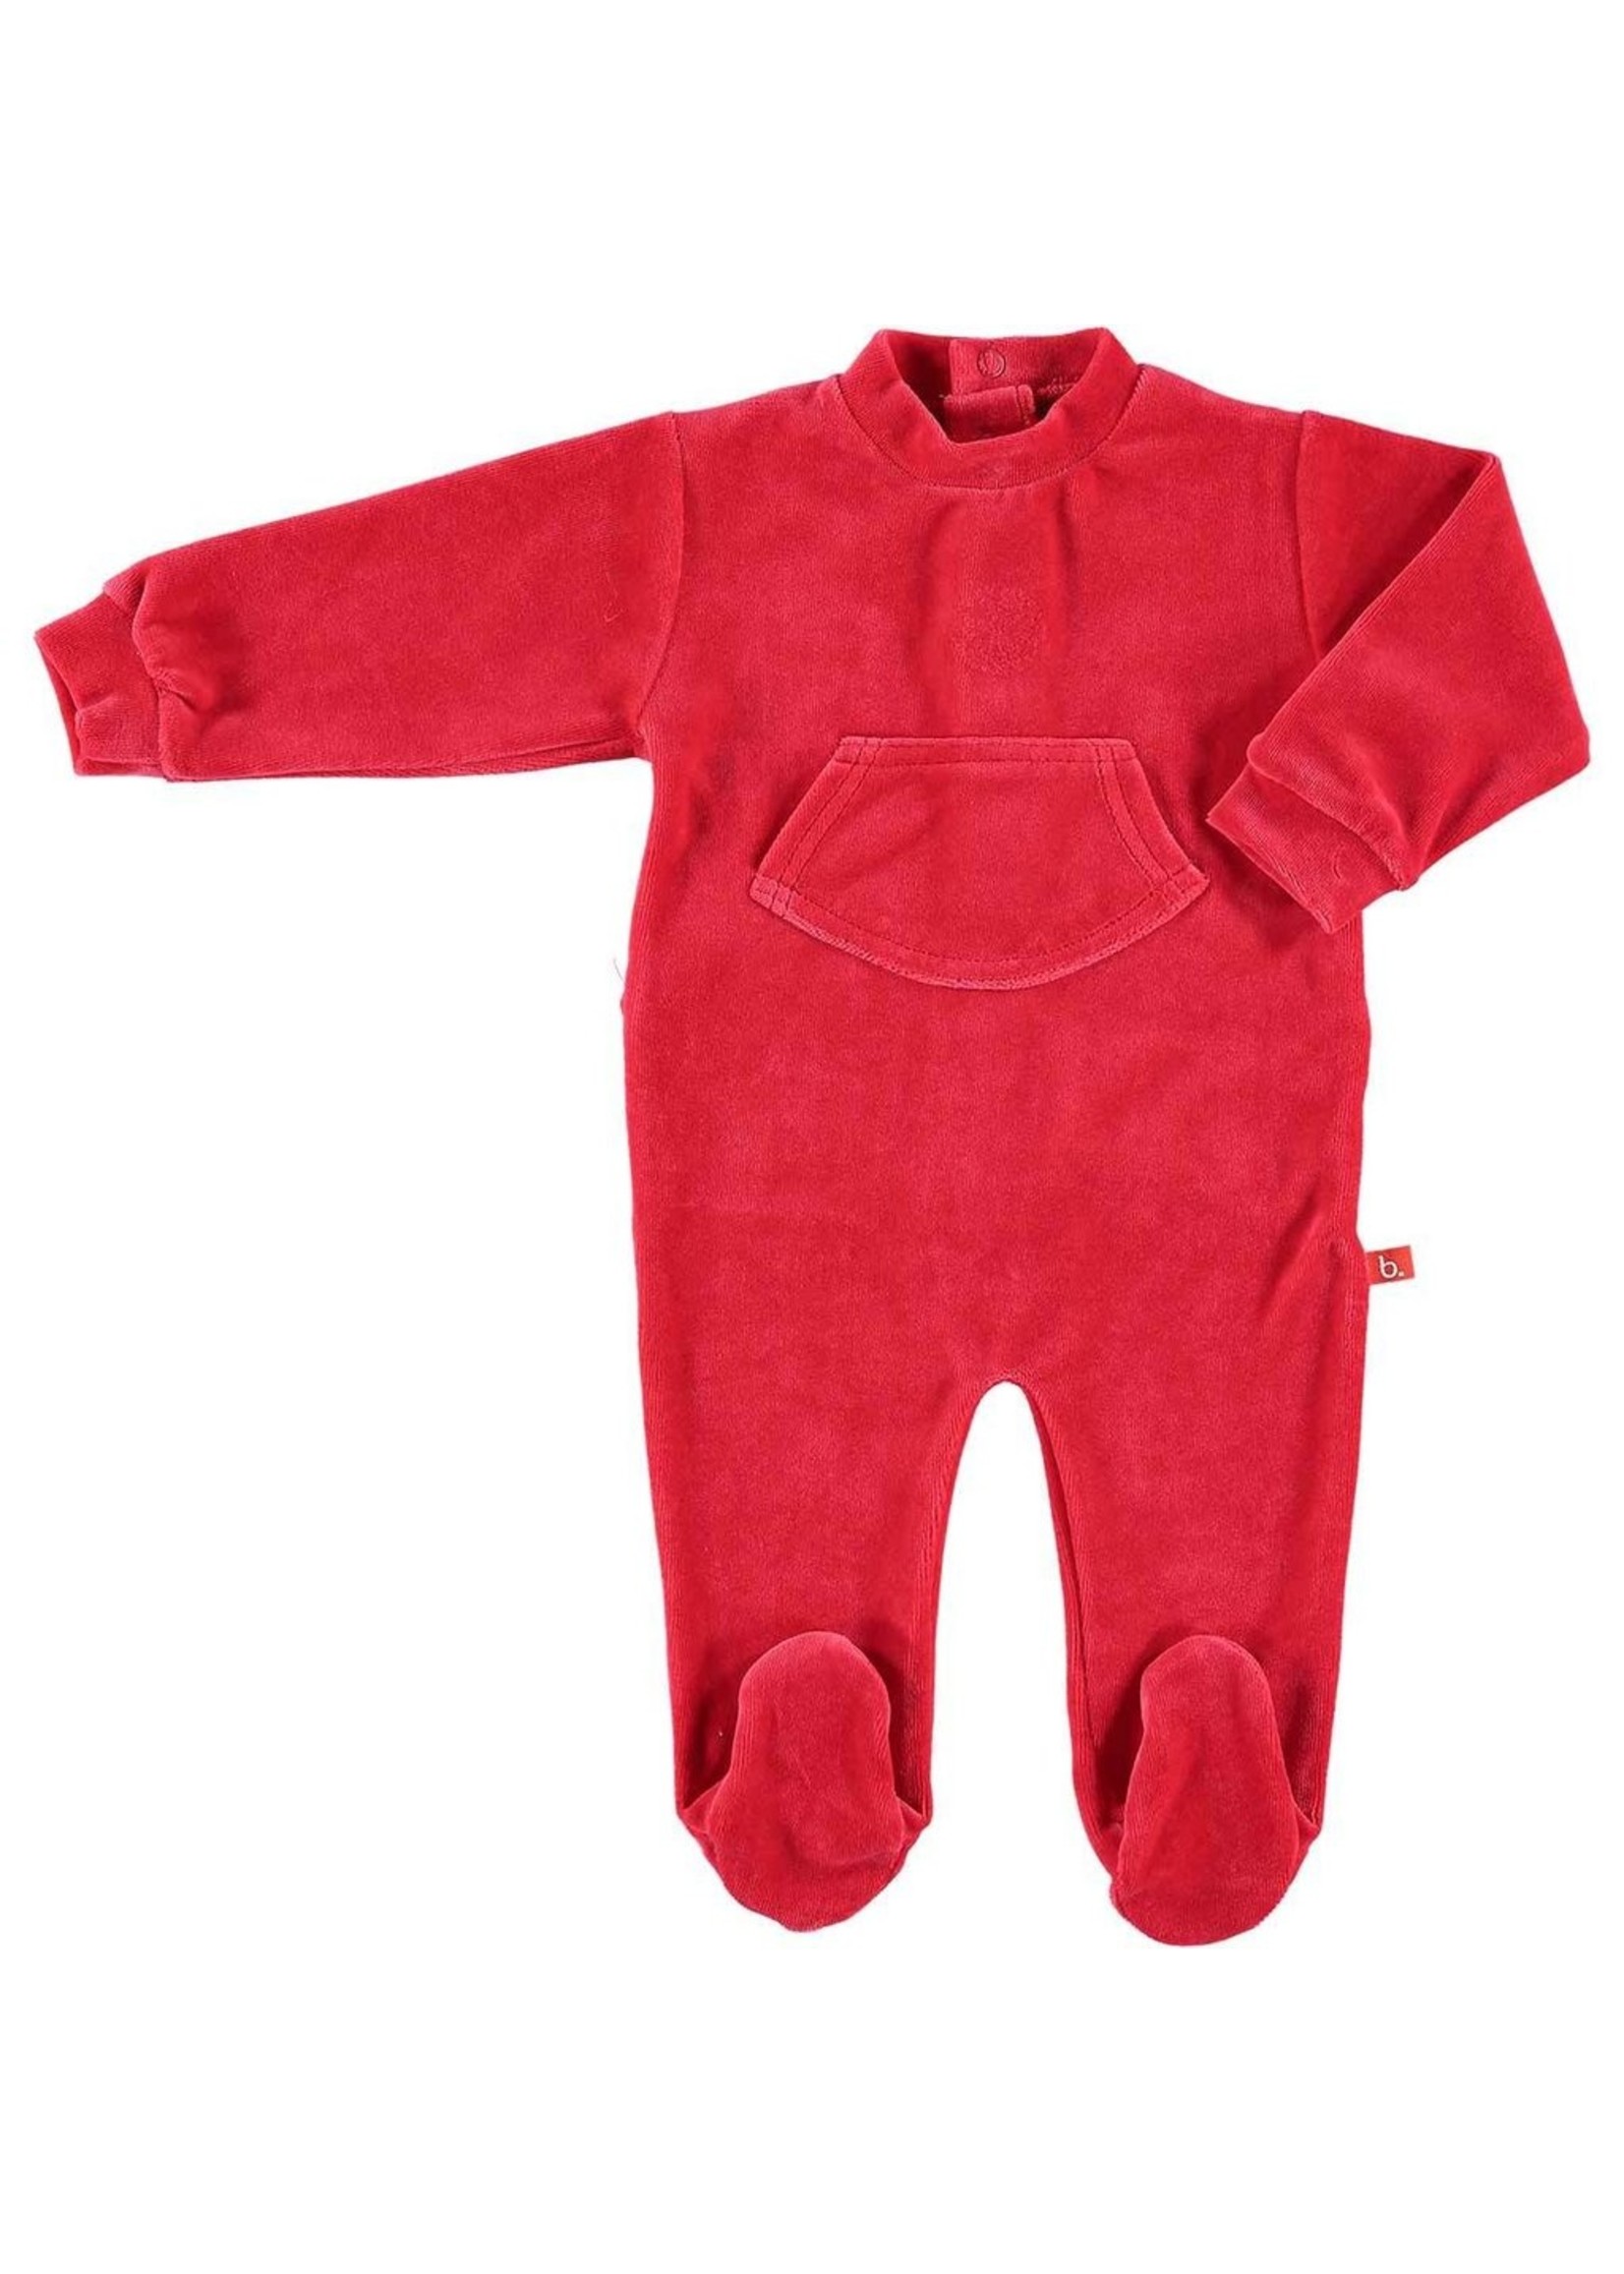 Limo basics Playsuit and/or pyjama with feet. Made of soft nicky velour, organic cotton.